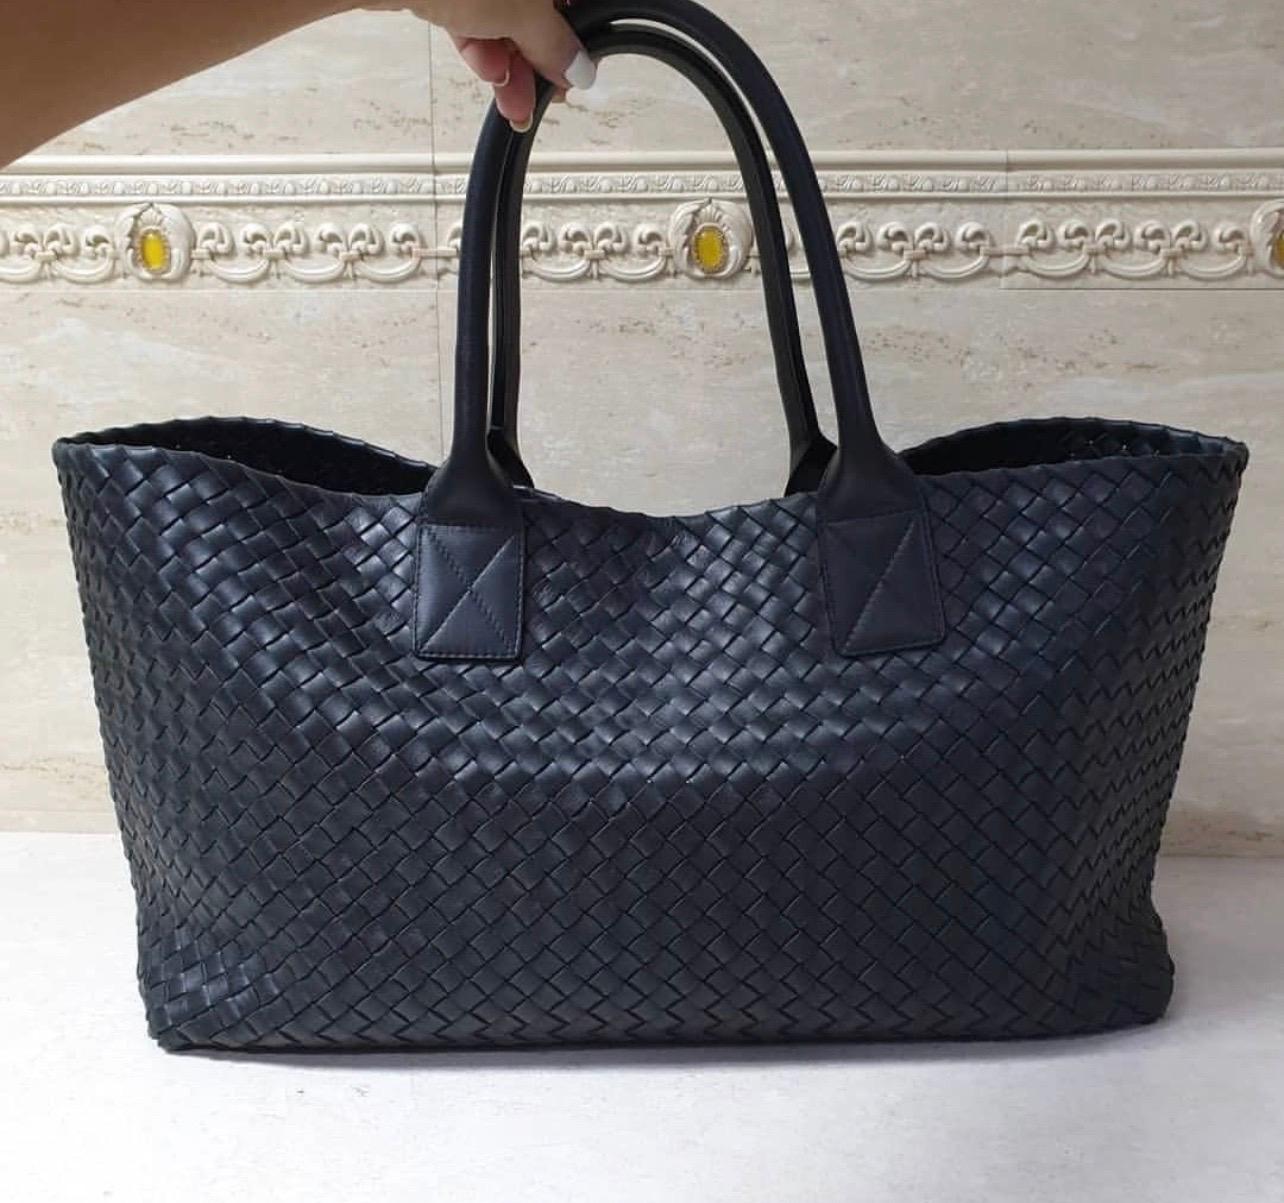 Designed to be spacious and lightweight, this version is hand woven from matte  lamp leather. 
Finished with rolled handles and an interior zipper pouch 
Length : 42 (58) cm
Height : 26 cm
Width : 17 cm

Original packaging is not included.

For